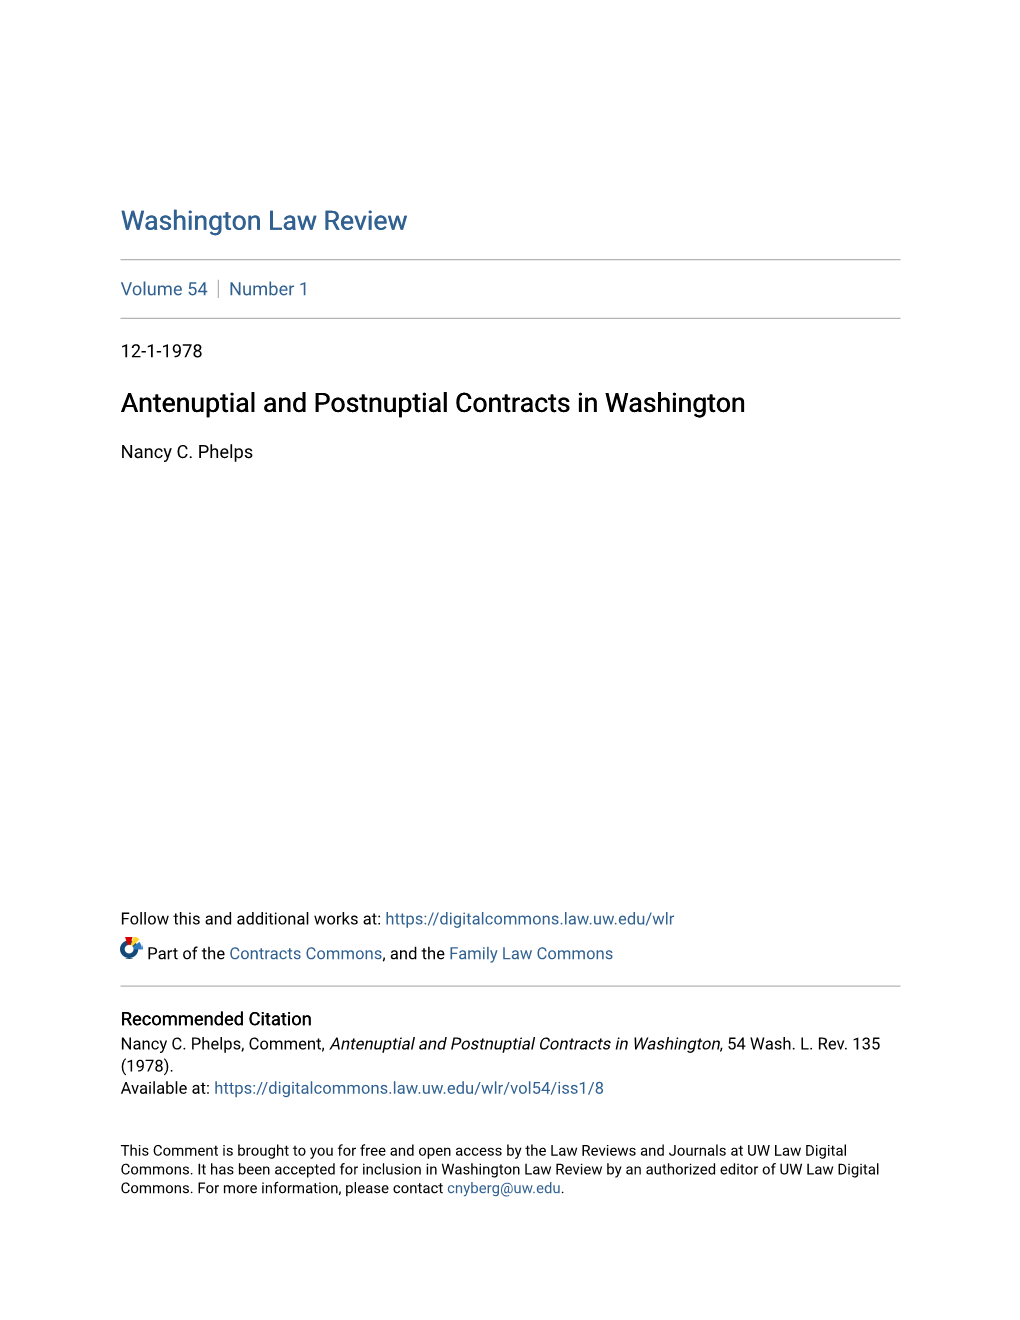 Antenuptial and Postnuptial Contracts in Washington